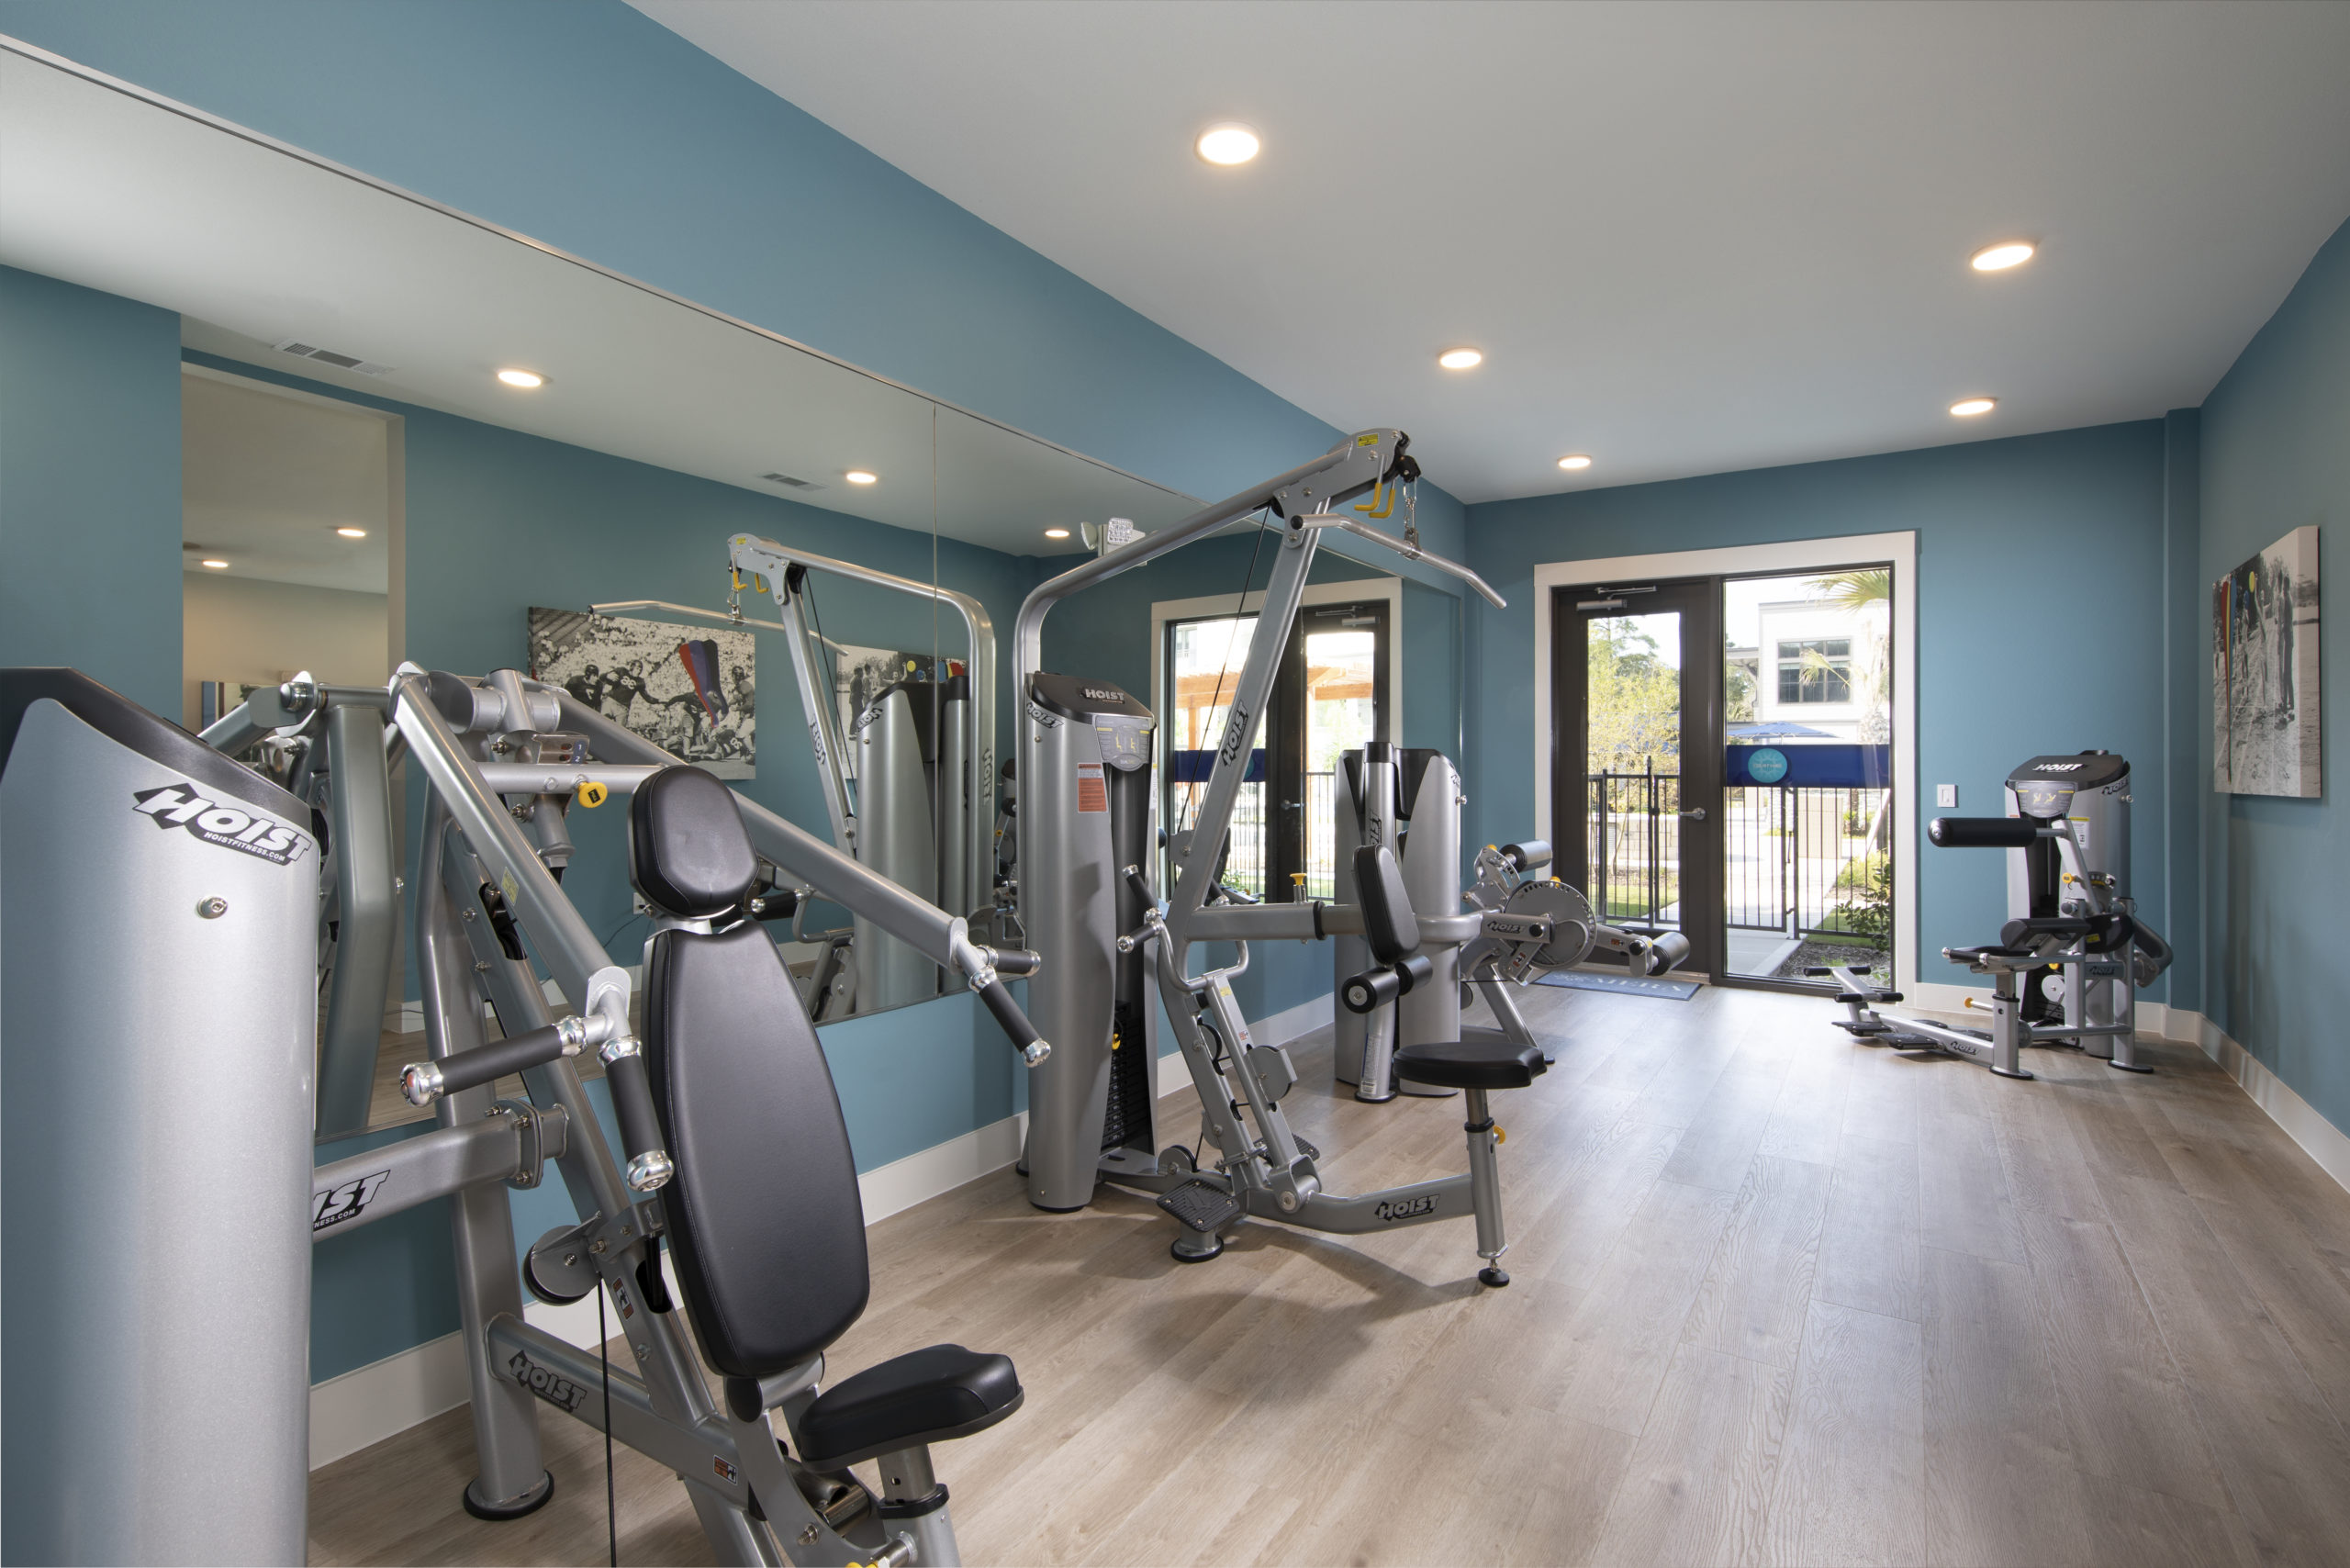 Picture of Mera Vintage Park fitness center